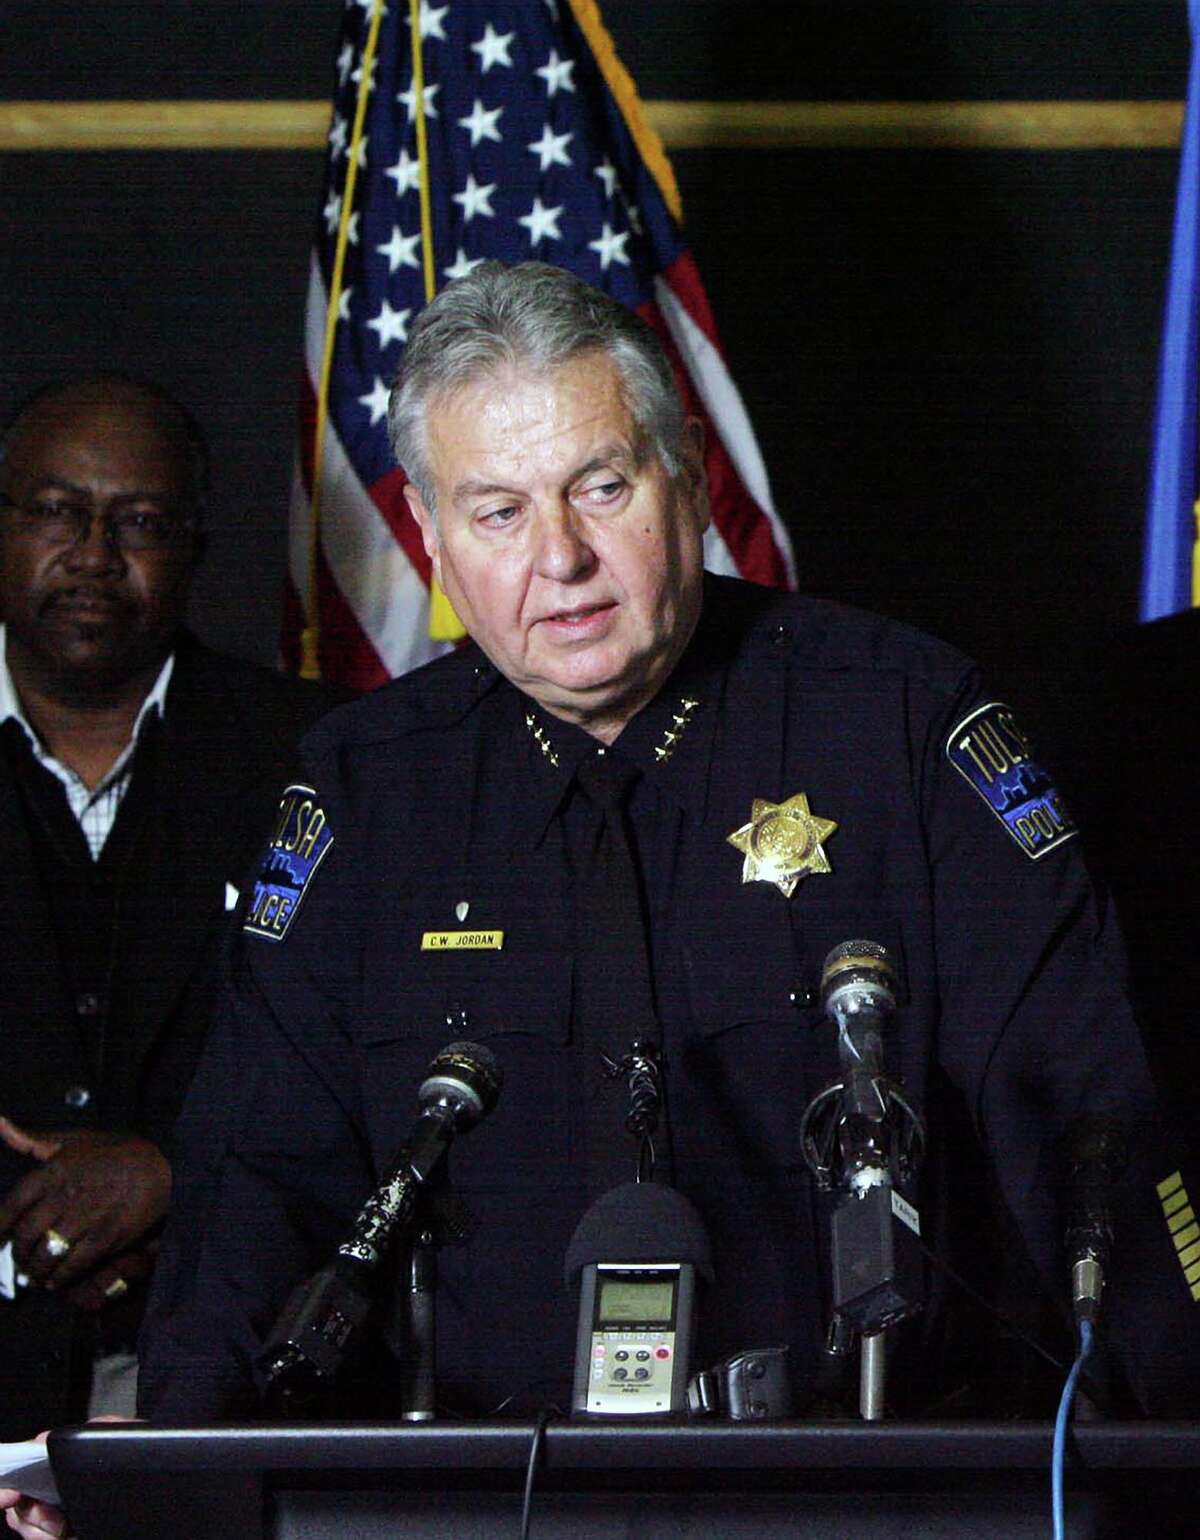 Tulsa Chief of Police Chuck Jordan speaks during a news conference at the Tulsa Police Department, Saturday, April 7, 2012 in downtown Tulsa, Okla. Police believe the same attacker or attackers are behind a series of early-morning shootings in which three people were killed and two others were critically wounded within a three-mile span of north Tulsa. (AP Photo/Tulsa World, James Gibbard) ONLINE OUT; TV OUT; TULSA OUT